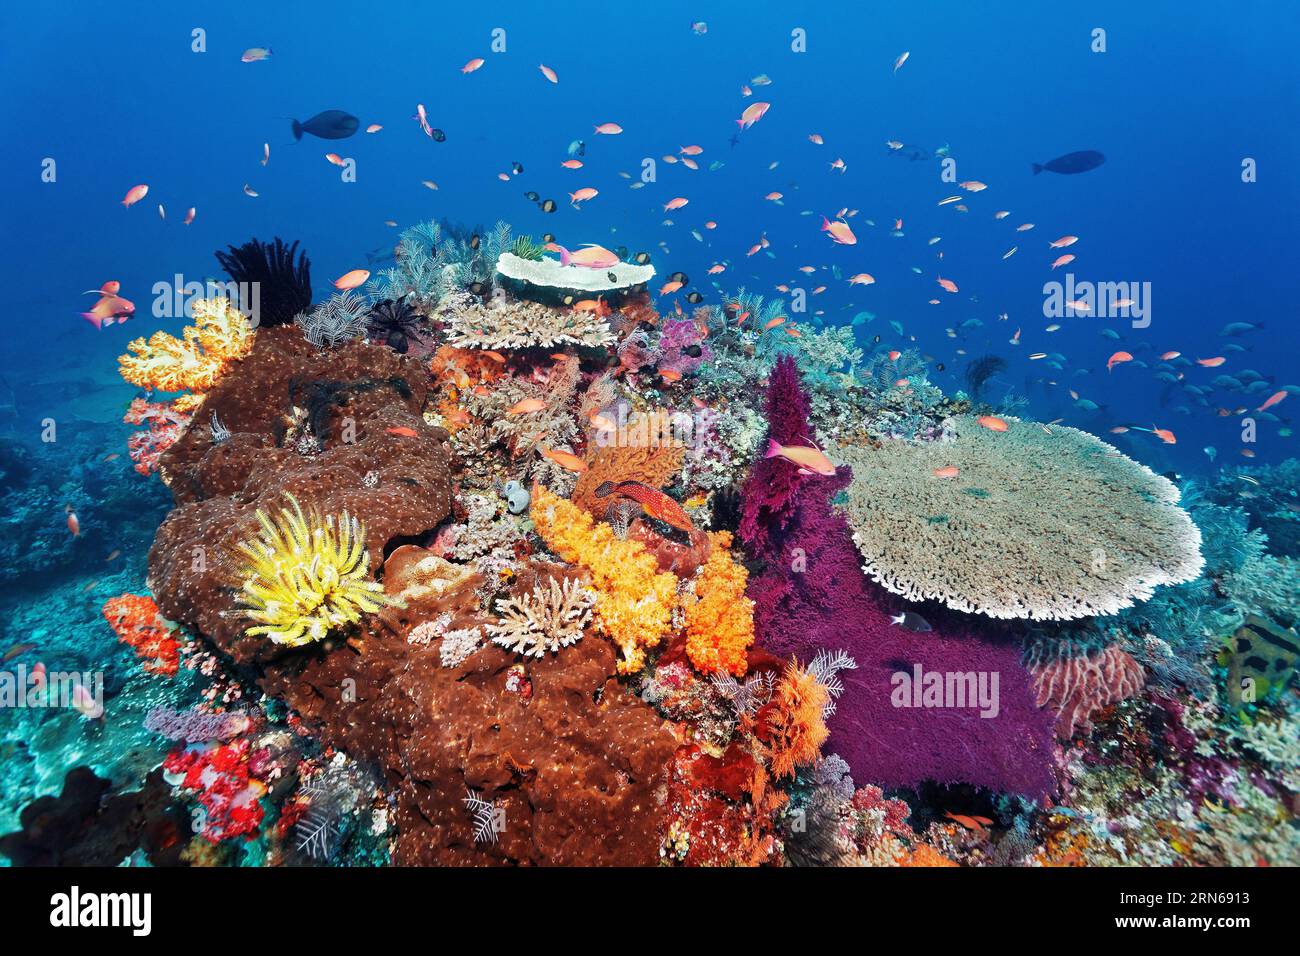 Coral reef, reef top, with various soft corals (Alcyonacea), hard corals (Hexacorallia), sponges (Porifera), bright many colours, multicoloured Stock Photo